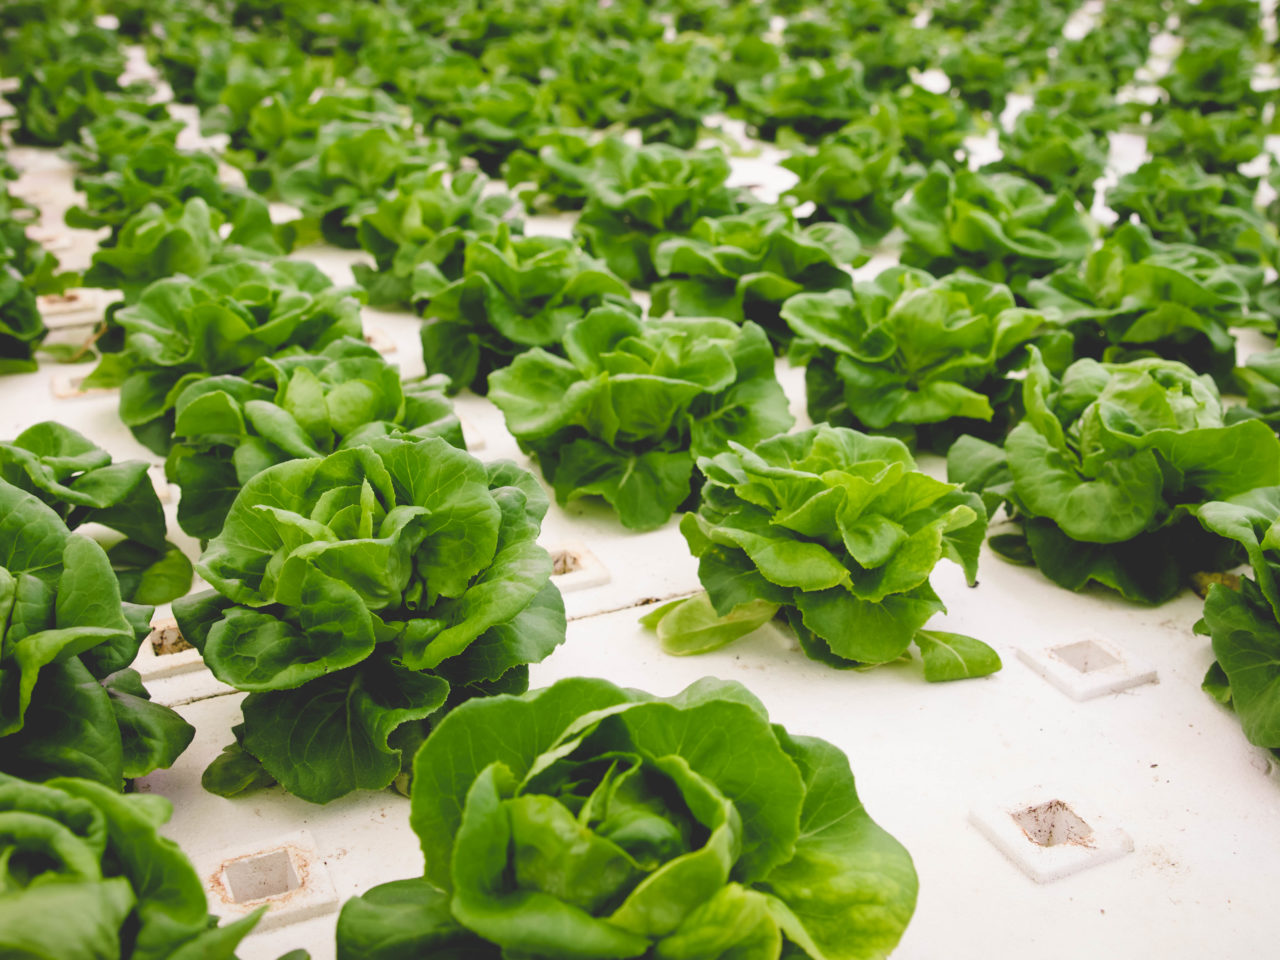 lettuce crop in isometric view